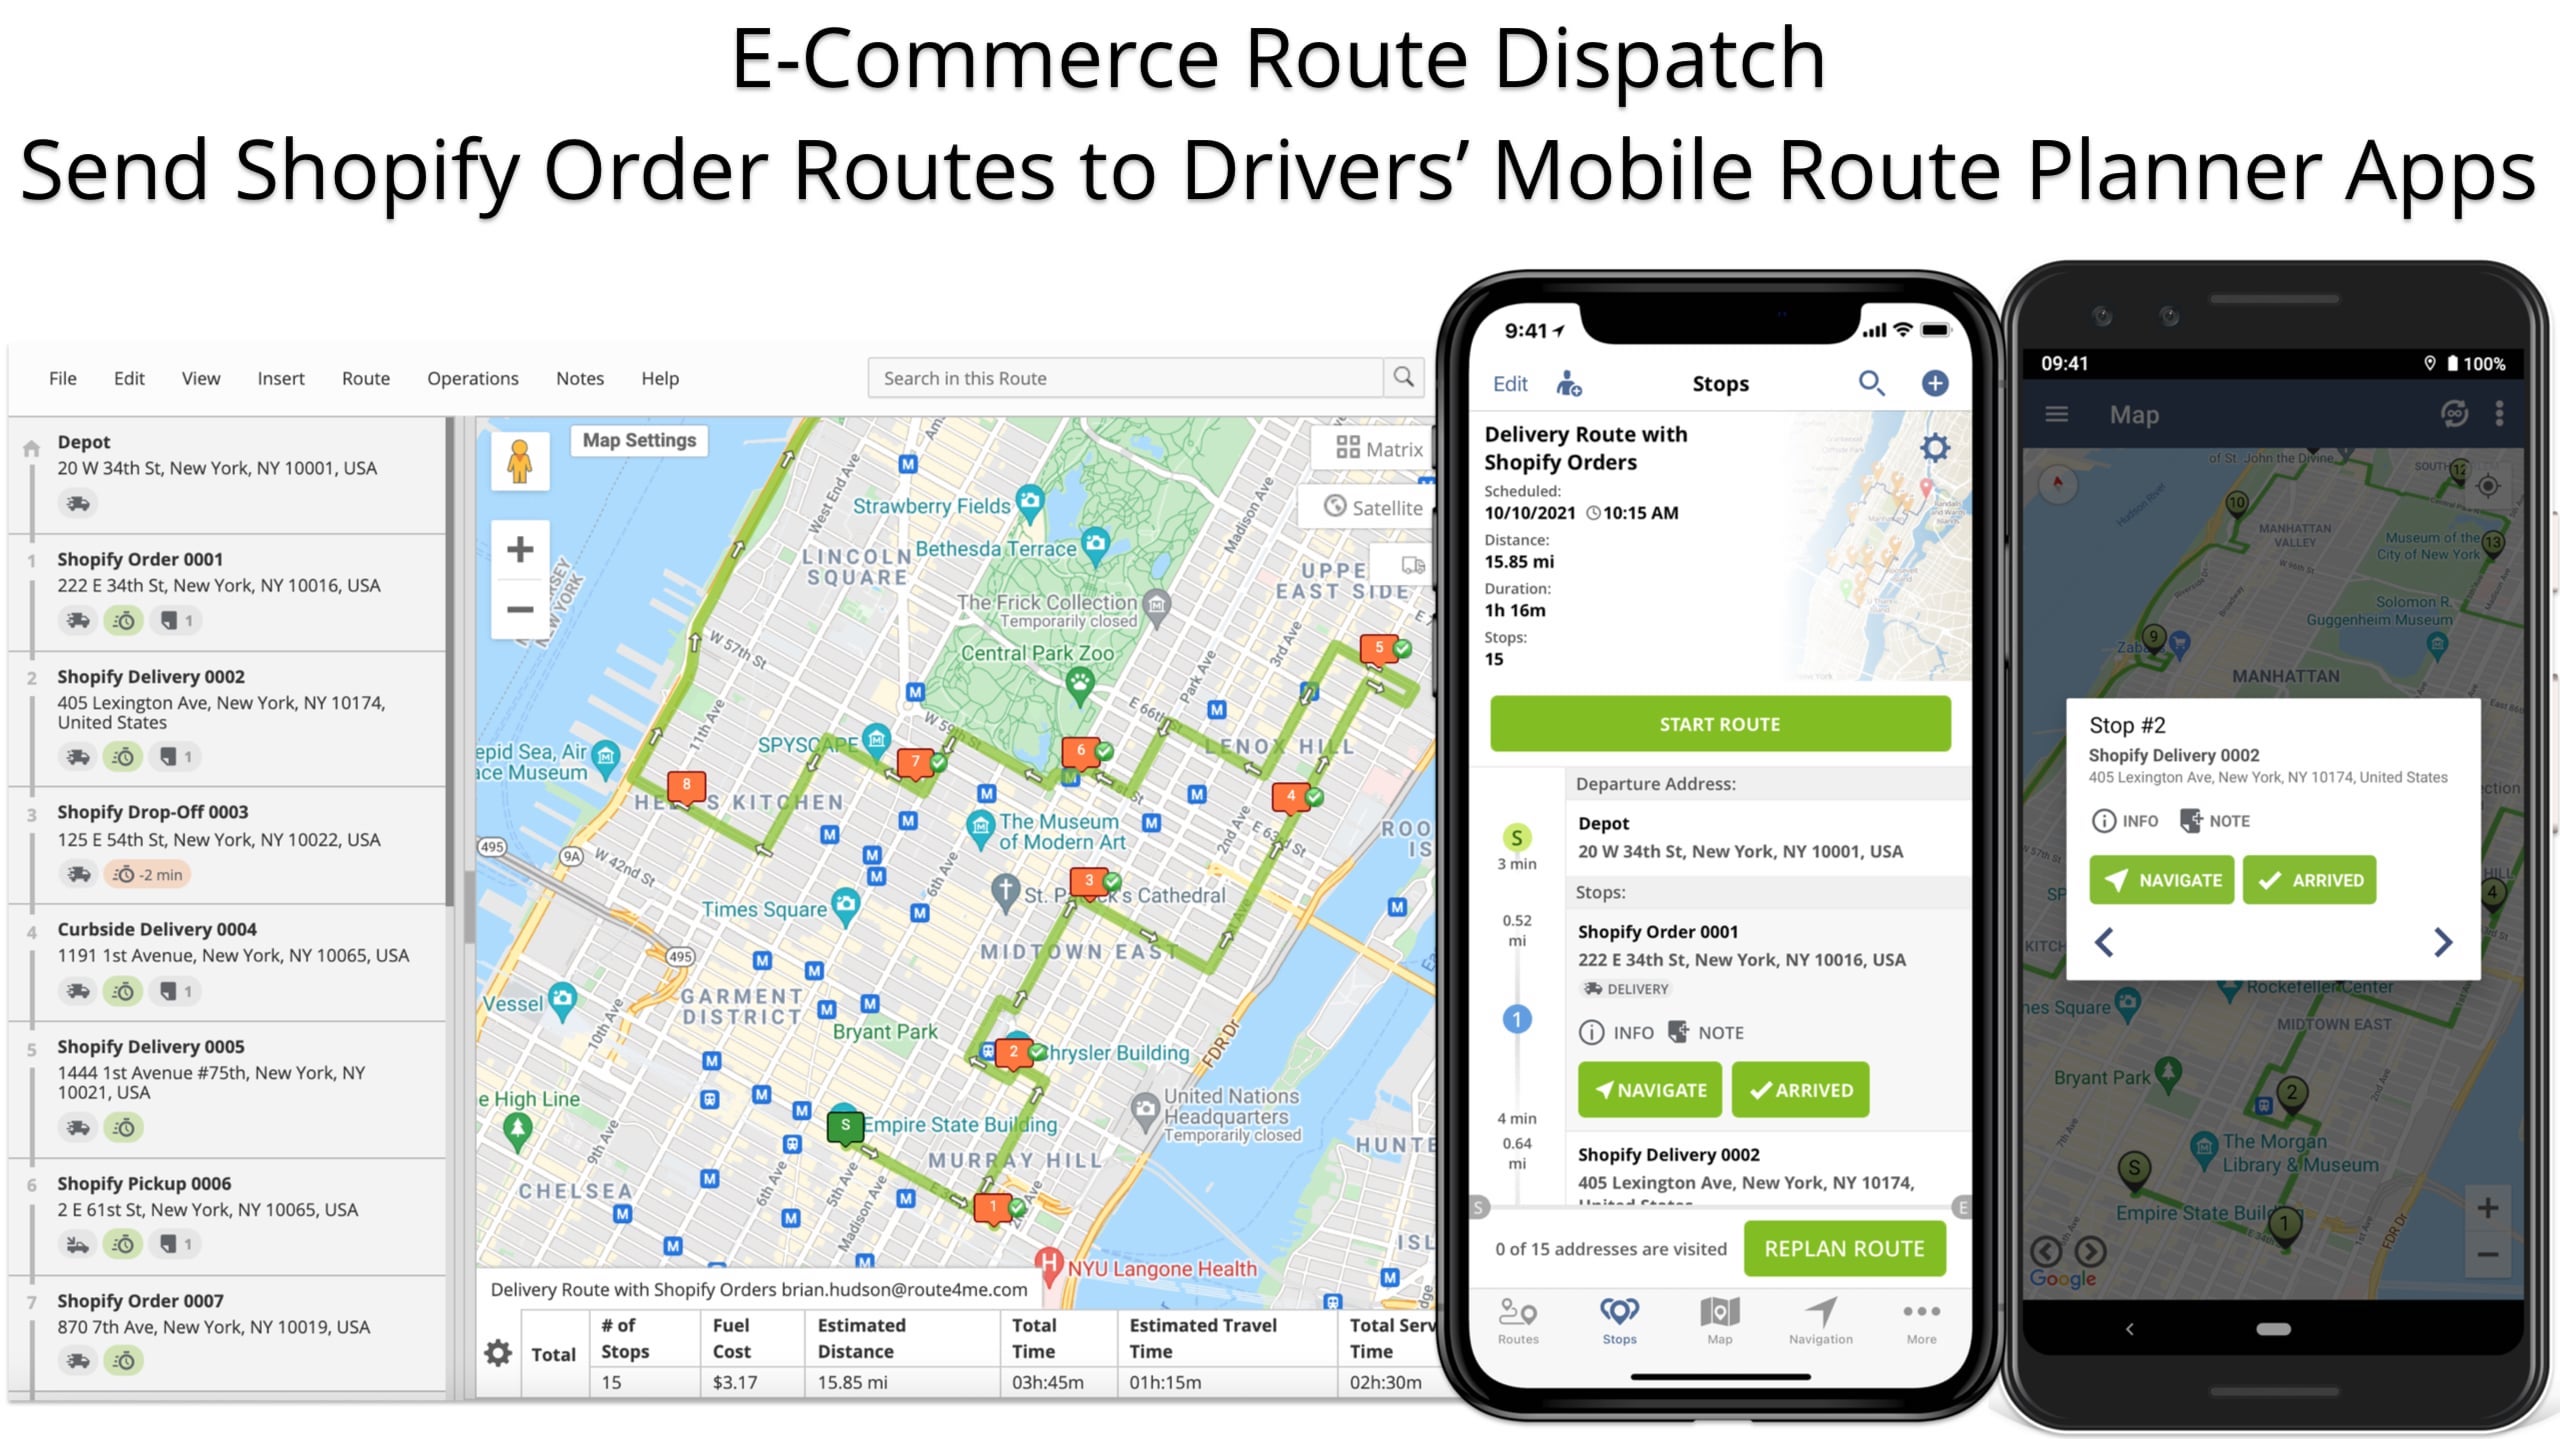 Dispatch Shopify order routes between mobile and website local delivery route planner apps.